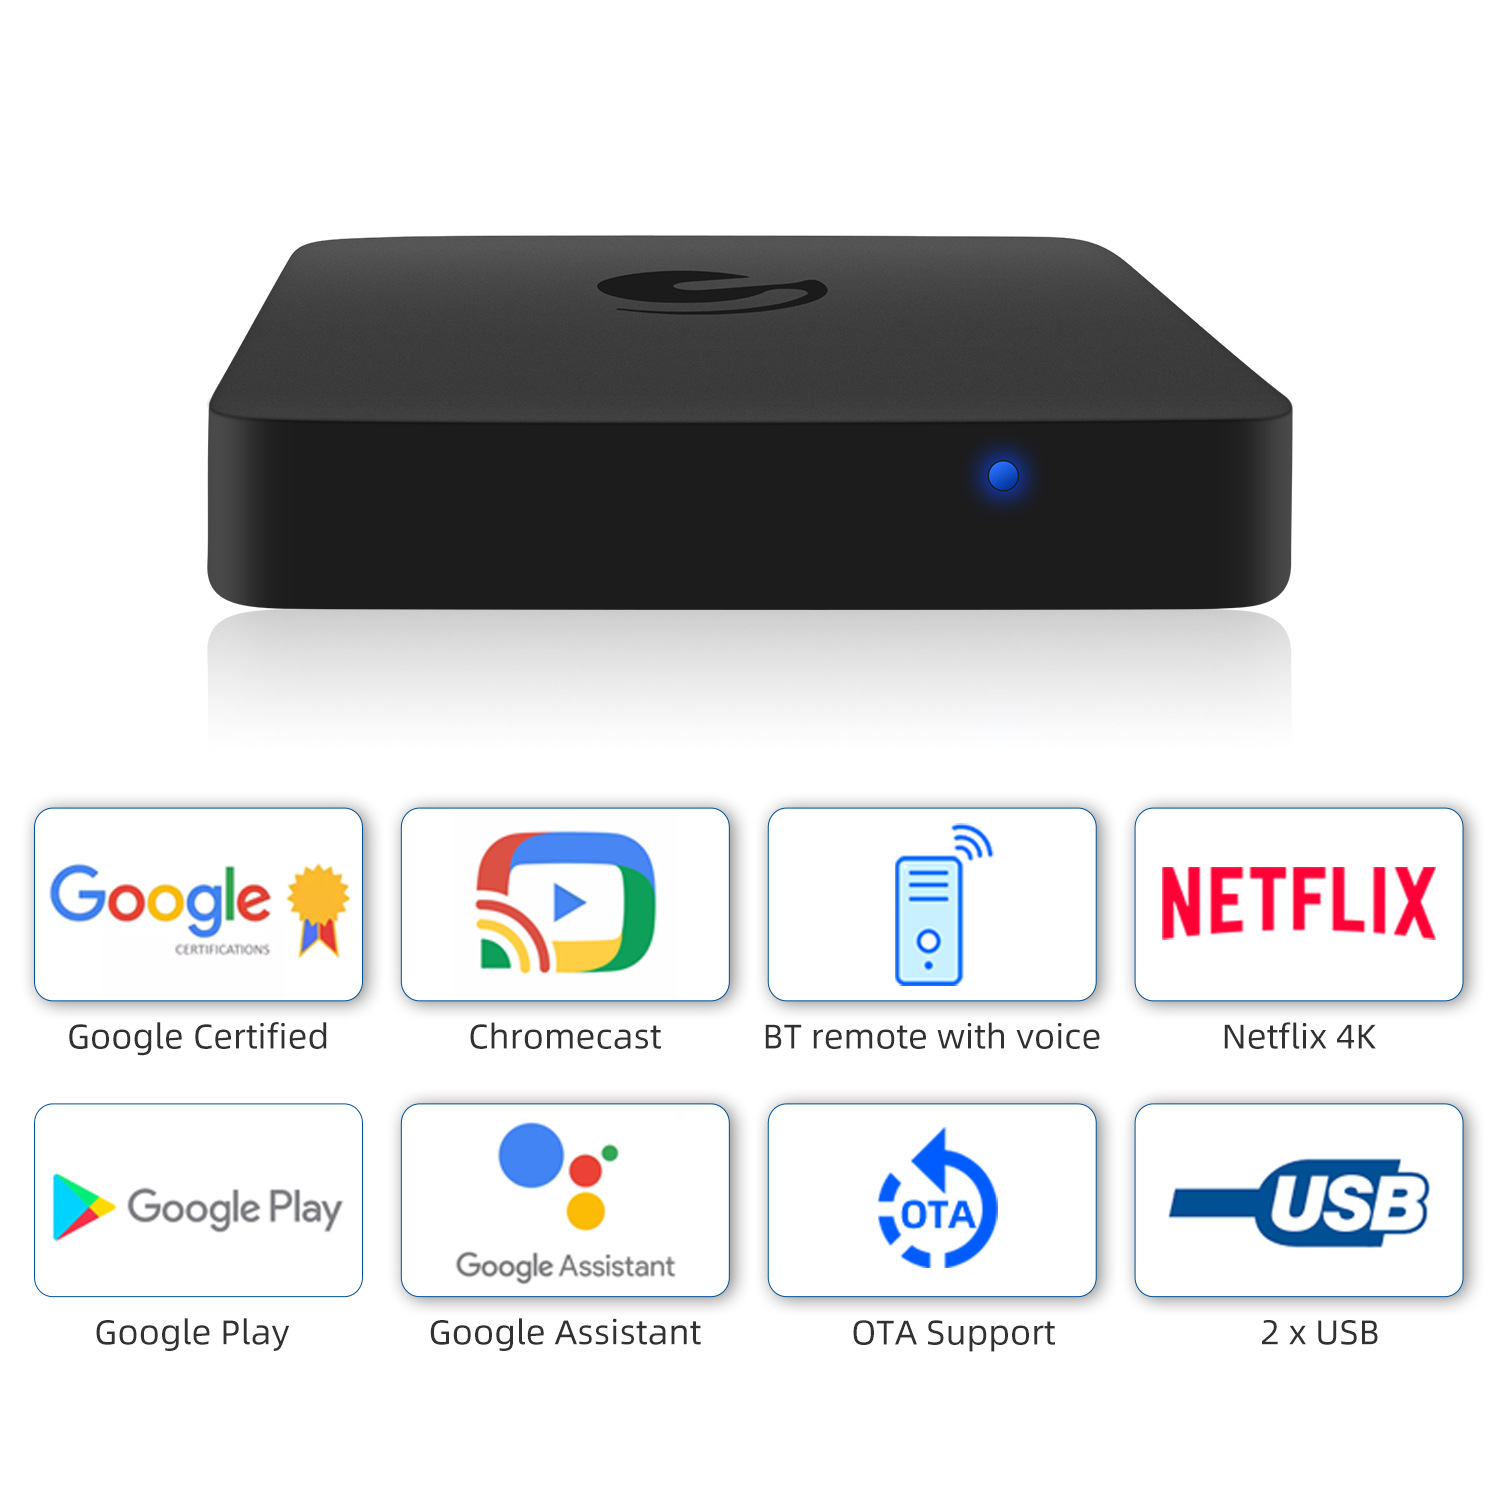 EMATIC-Android-90-Voice-Control-Google-Certified--Set-Top-Box-Smart-Player-Netflix-4K-Dual-band-ATV--1974314-3